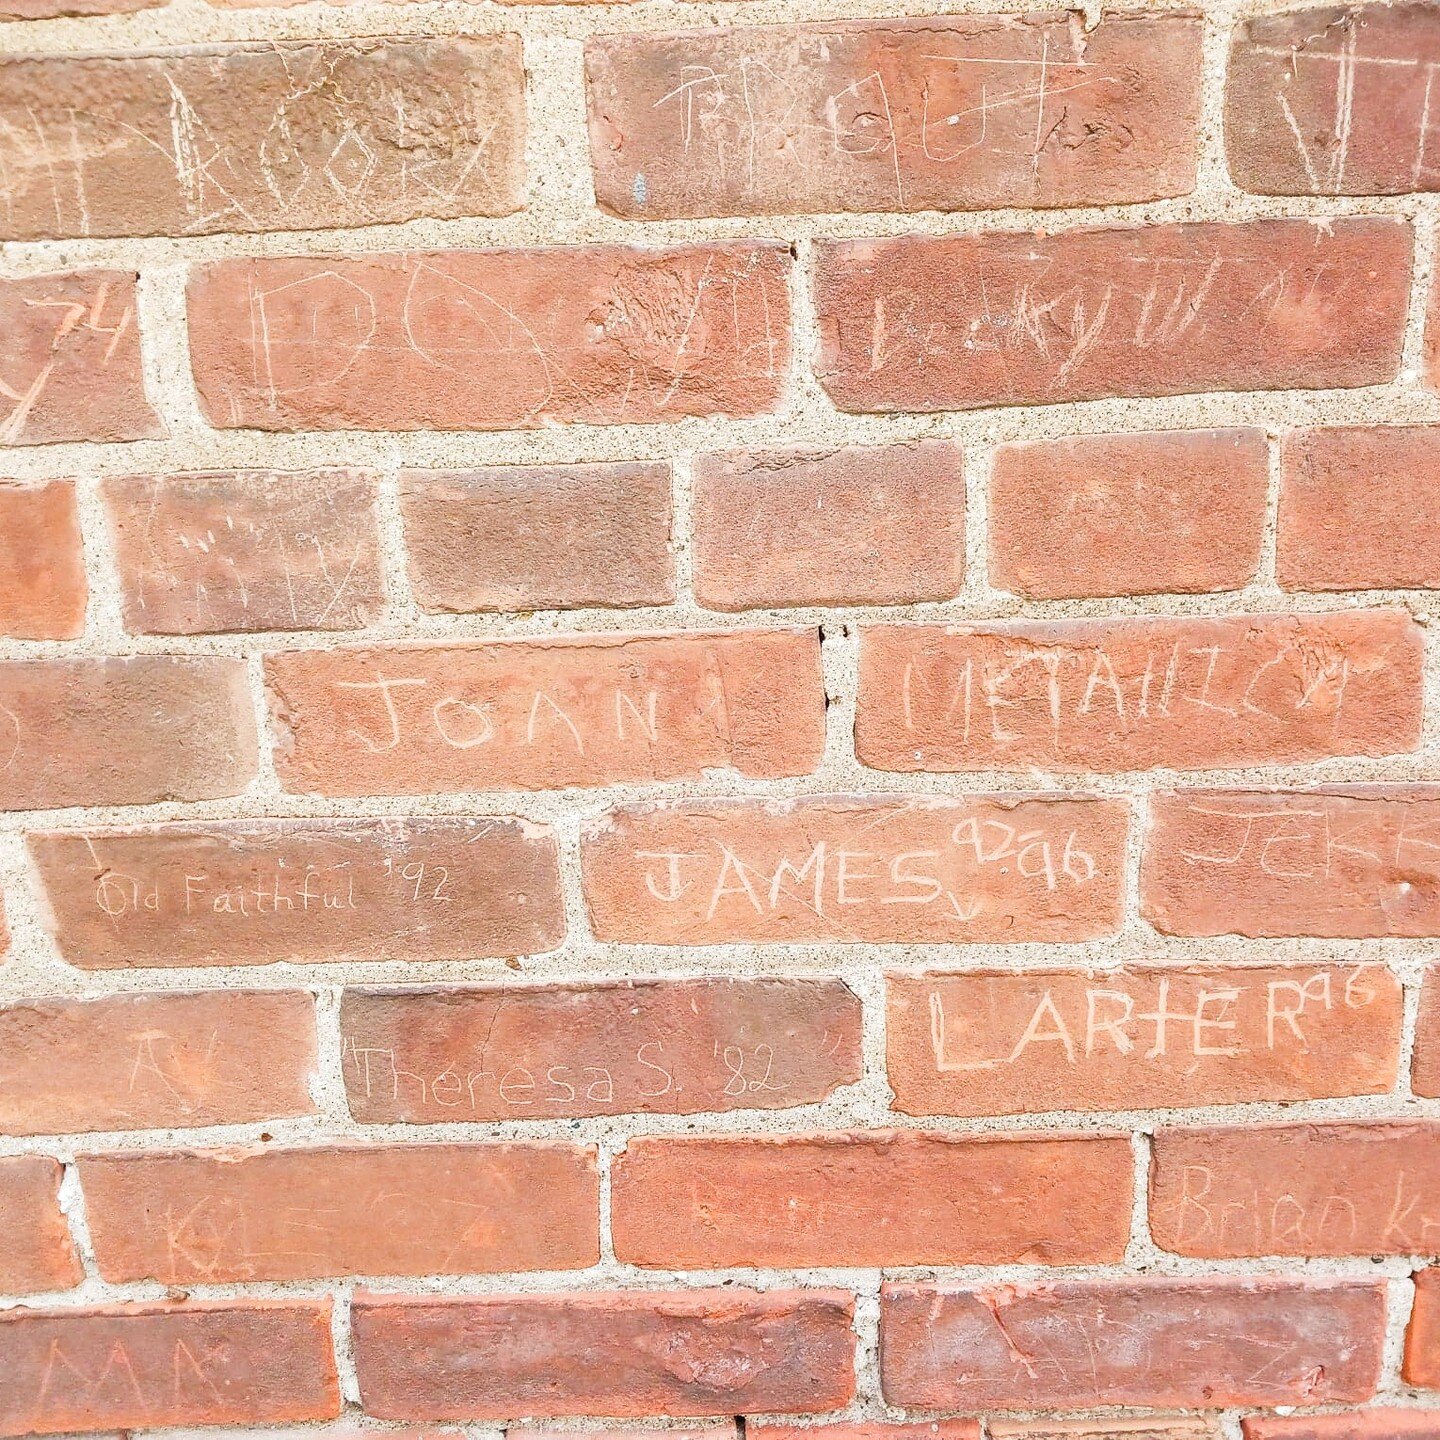 The History of The Grant House continues to get even better.

These are people who worked at The Grant House previously and are engraved on the outside of the hotel.

Do you spy someone you know? or yourself? let us know, we would love to know where 